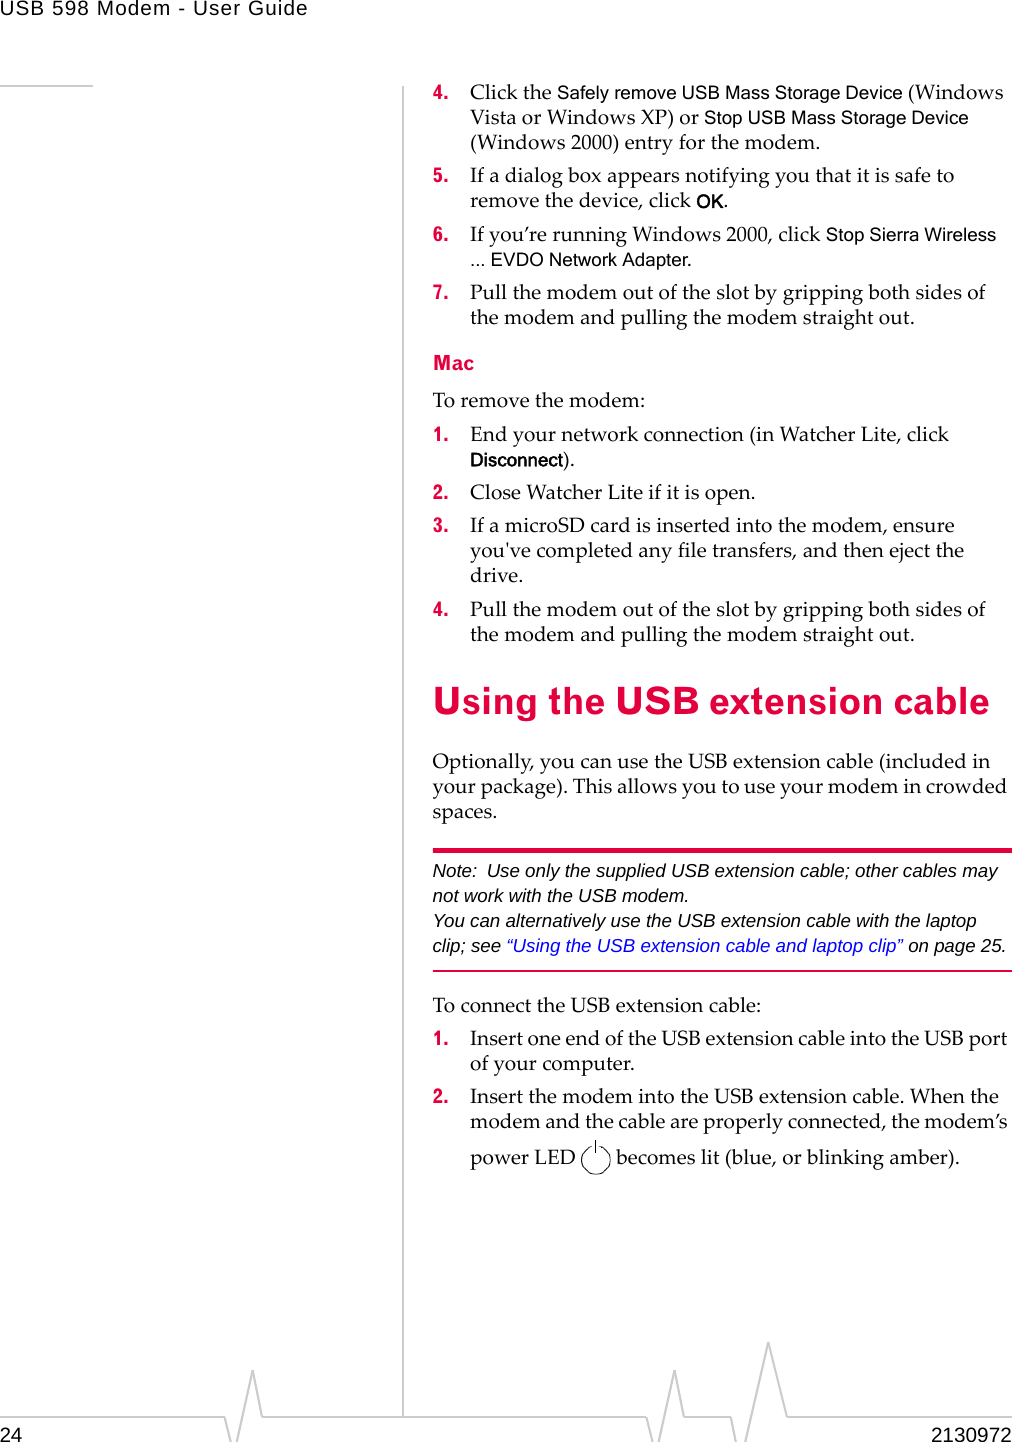 USB 598 Modem - User Guide24 21309724. ClicktheSafely remove USB Mass Storage Device(WindowsVistaorWindowsXP)orStop USB Mass Storage Device(Windows2000)entryforthemodem.5. Ifadialogboxappearsnotifyingyouthatitissafetoremovethedevice,clickOK.6. Ifyou’rerunningWindows2000,clickStop Sierra Wireless ... EVDO Network Adapter.7. Pullthemodemoutoftheslotbygrippingbothsidesofthemodemandpullingthemodemstraightout.MacToremovethemodem:1. Endyournetworkconnection(inWatcherLite,clickDisconnect).2. CloseWatcherLiteifitisopen.3. IfamicroSDcardisinsertedintothemodem,ensureyouʹvecompletedanyfiletransfers,andthenejectthedrive.4. Pullthemodemoutoftheslotbygrippingbothsidesofthemodemandpullingthemodemstraightout.Using the USB extension cableOptionally,youcanusetheUSBextensioncable(includedinyourpackage).Thisallowsyoutouseyourmodemincrowdedspaces.Note: Use only the supplied USB extension cable; other cables may not work with the USB modem.You can alternatively use the USB extension cable with the laptop clip; see “Using the USB extension cable and laptop clip” on page 25.ToconnecttheUSBextensioncable:1. InsertoneendoftheUSBextensioncableintotheUSBportofyourcomputer.2. InsertthemodemintotheUSBextensioncable.Whenthemodemandthecableareproperlyconnected,themodem’spowerLEDbecomeslit(blue,orblinkingamber).